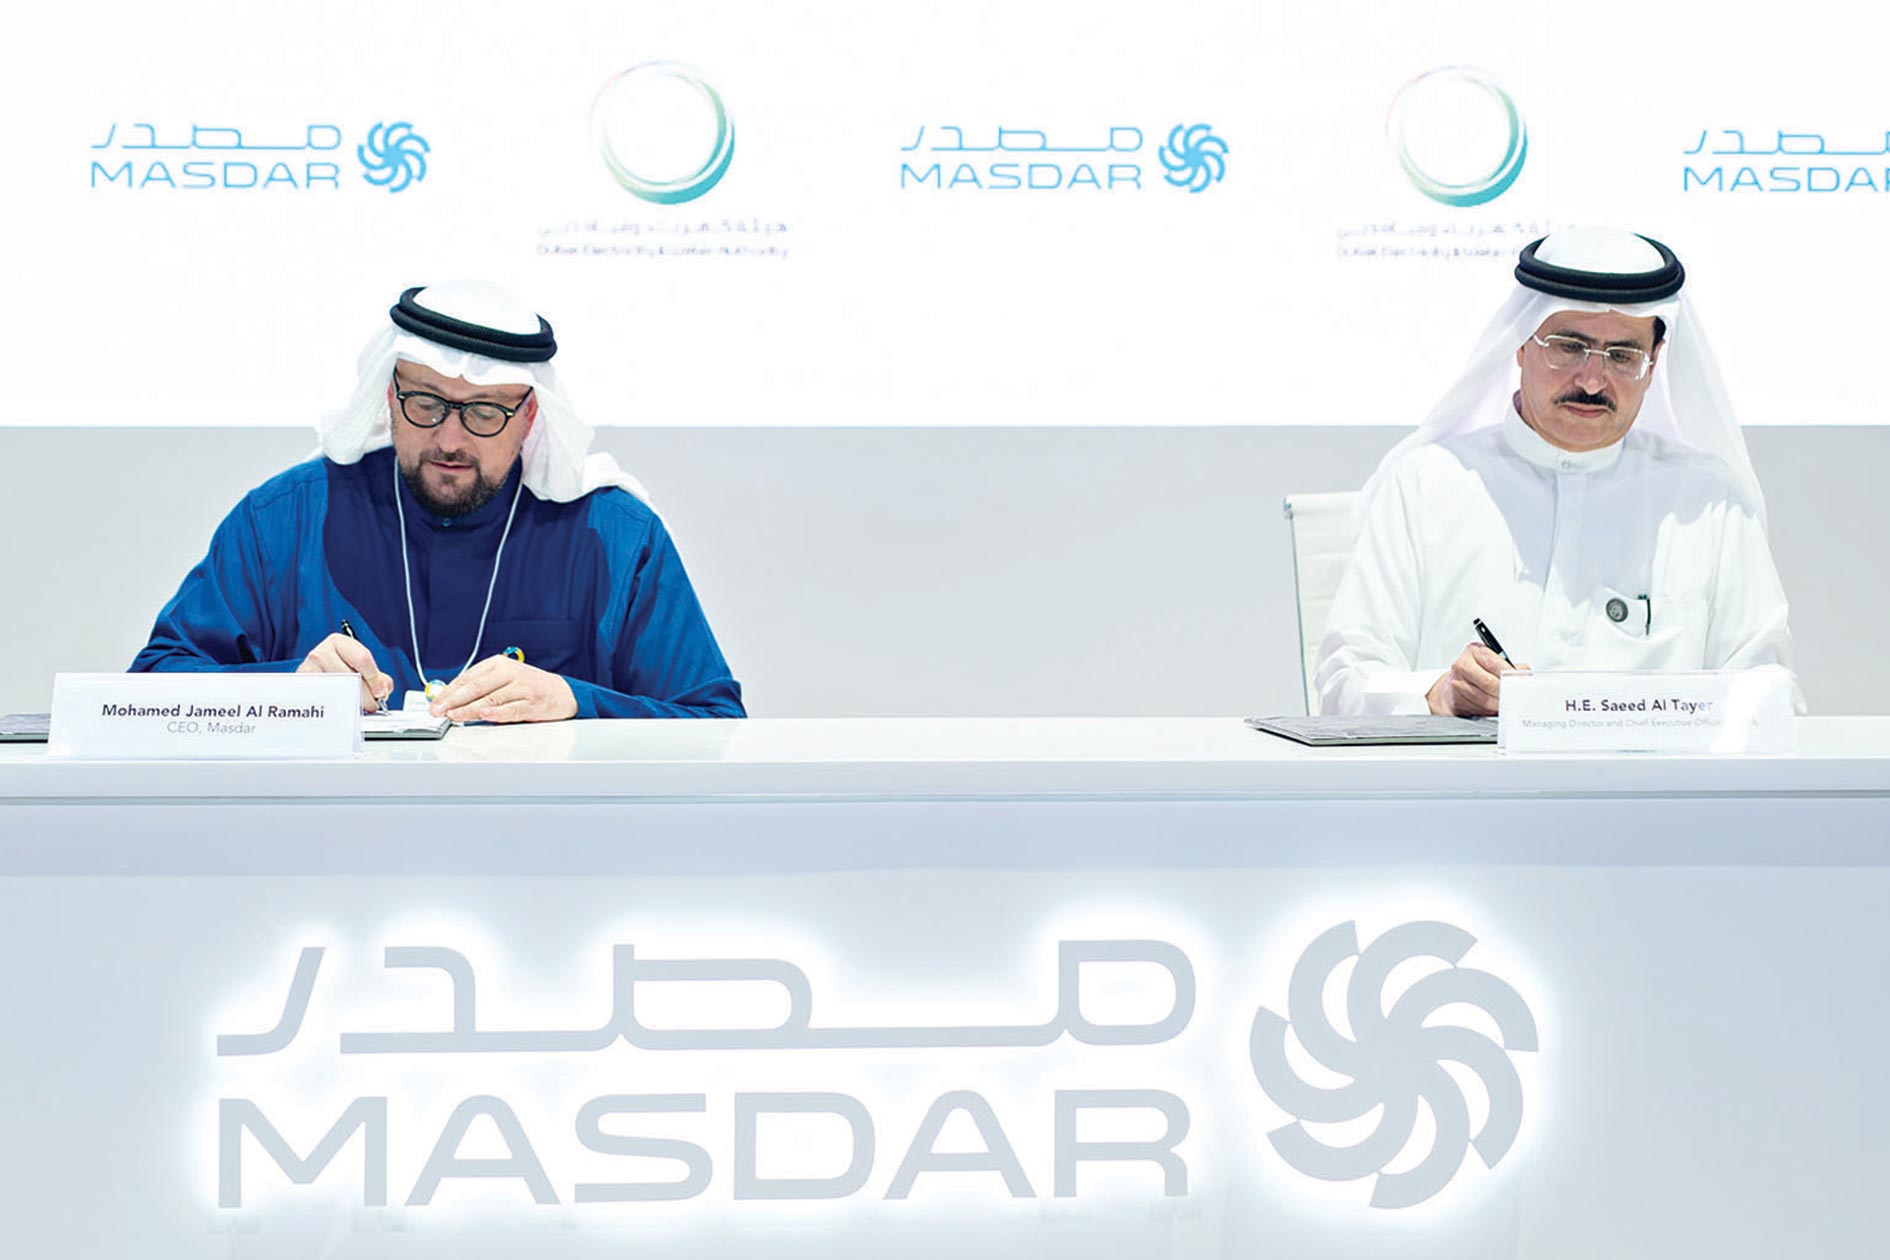 Saeed Mohammed Al Tayer and Mohamed Jameel Al Ramahi signing the agreement.